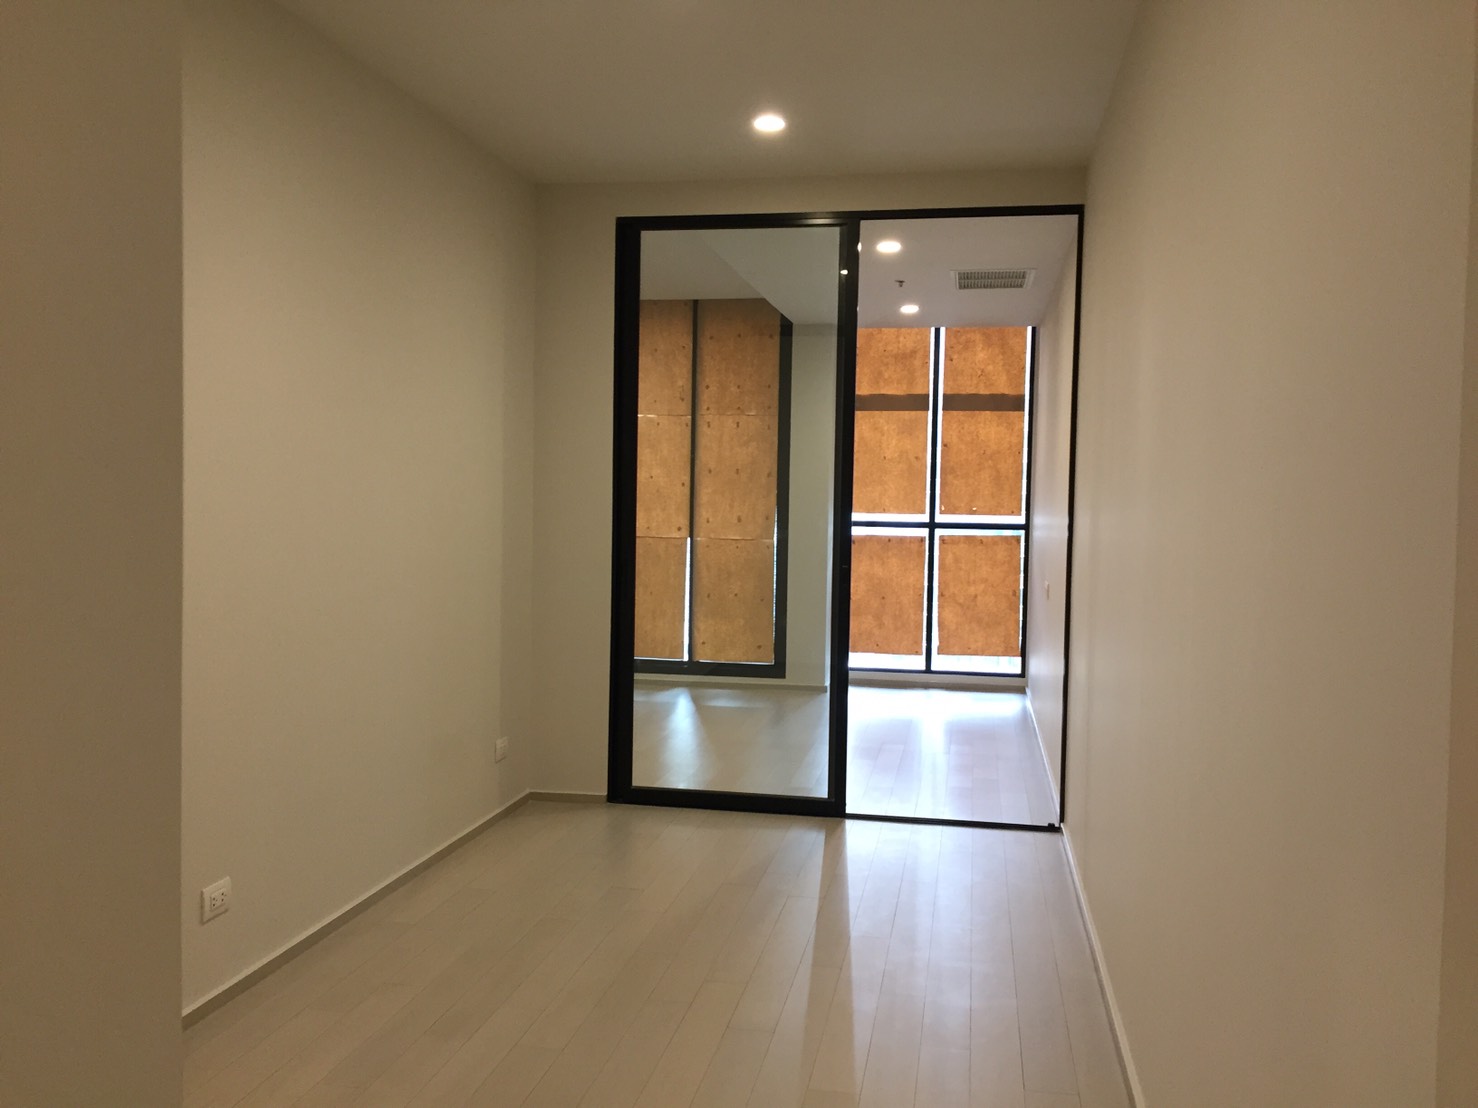 Brand New, Noble Ploenchit condo for sale, Luxury Zone, High floor, Private lift, 1 bedroom size 51 sq.m. Sky walk to BTS Ploenchit and next to Central Embassy Park Plaza.